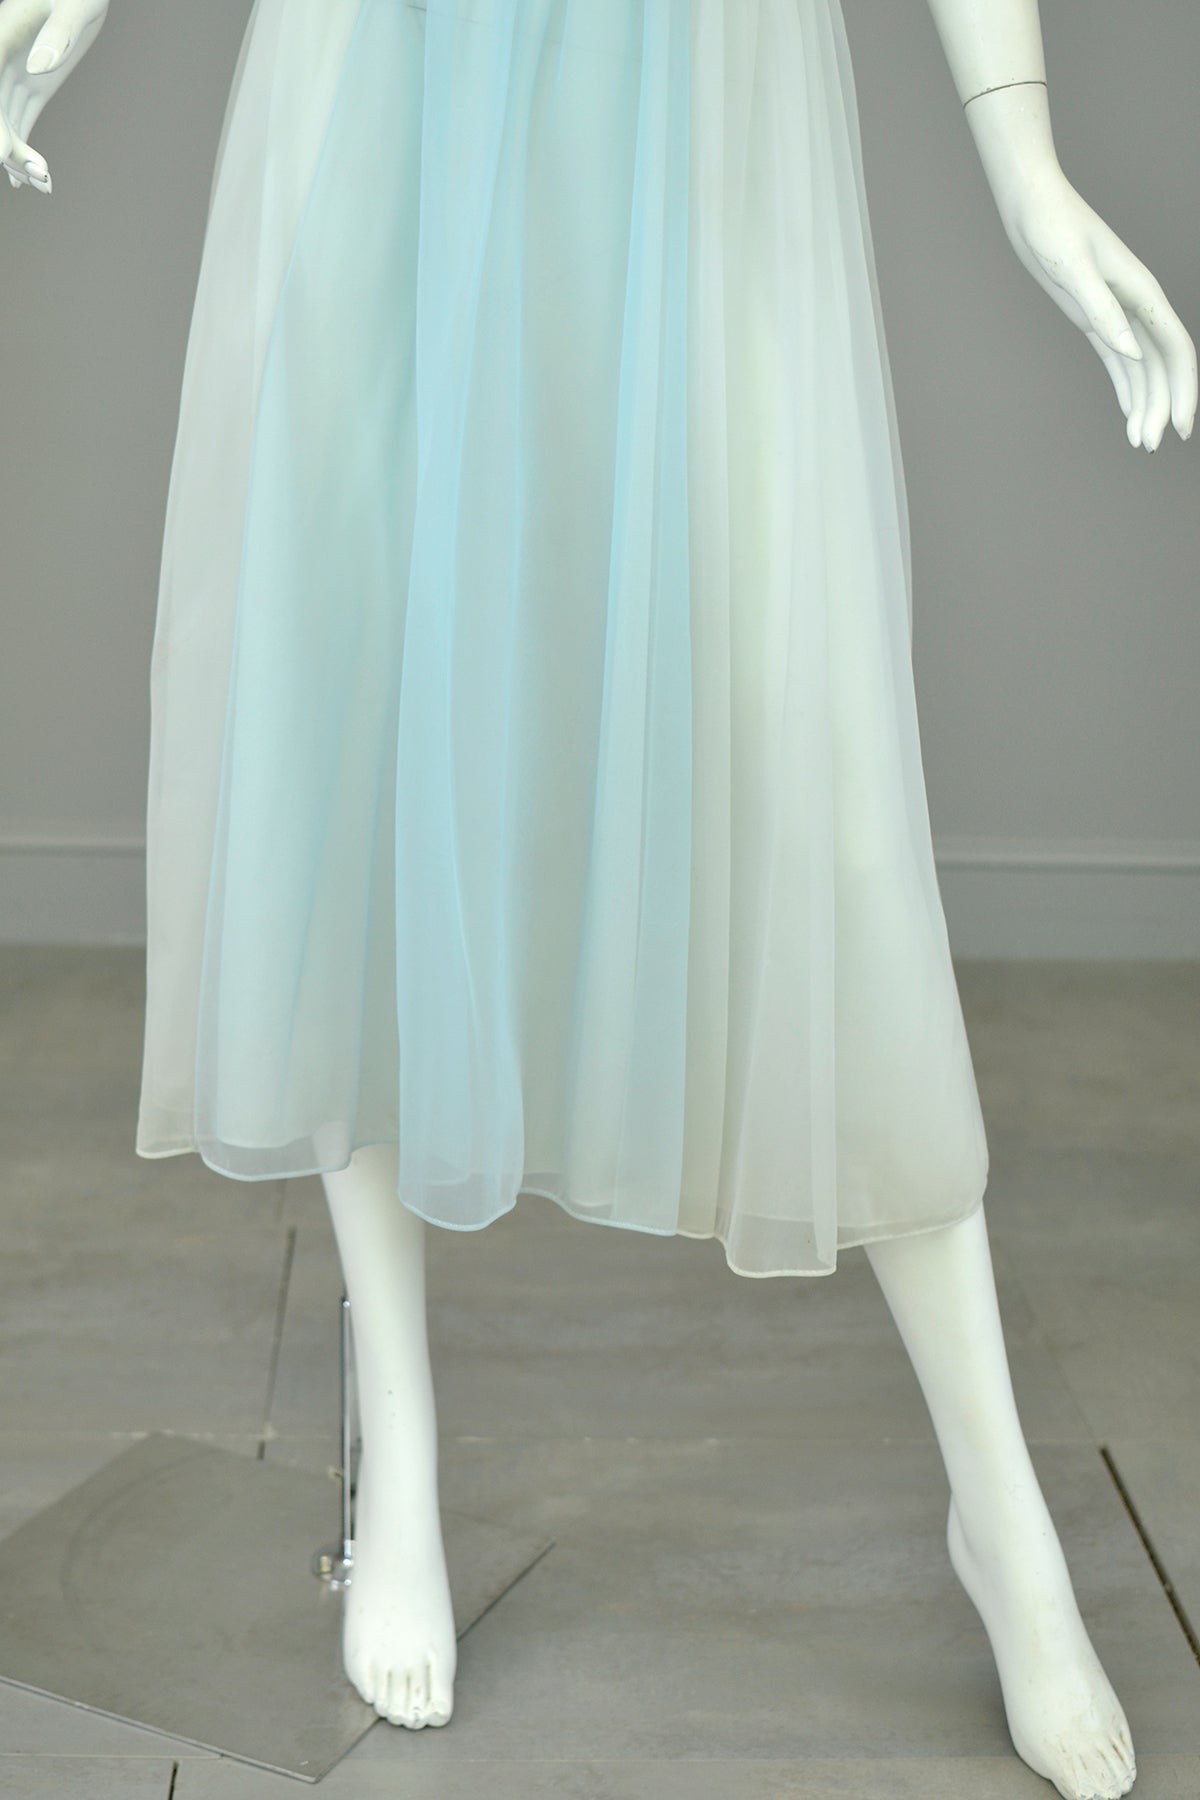 1960s Sky Blue Color Block Frothy Negligee Dress by Vanity Fair